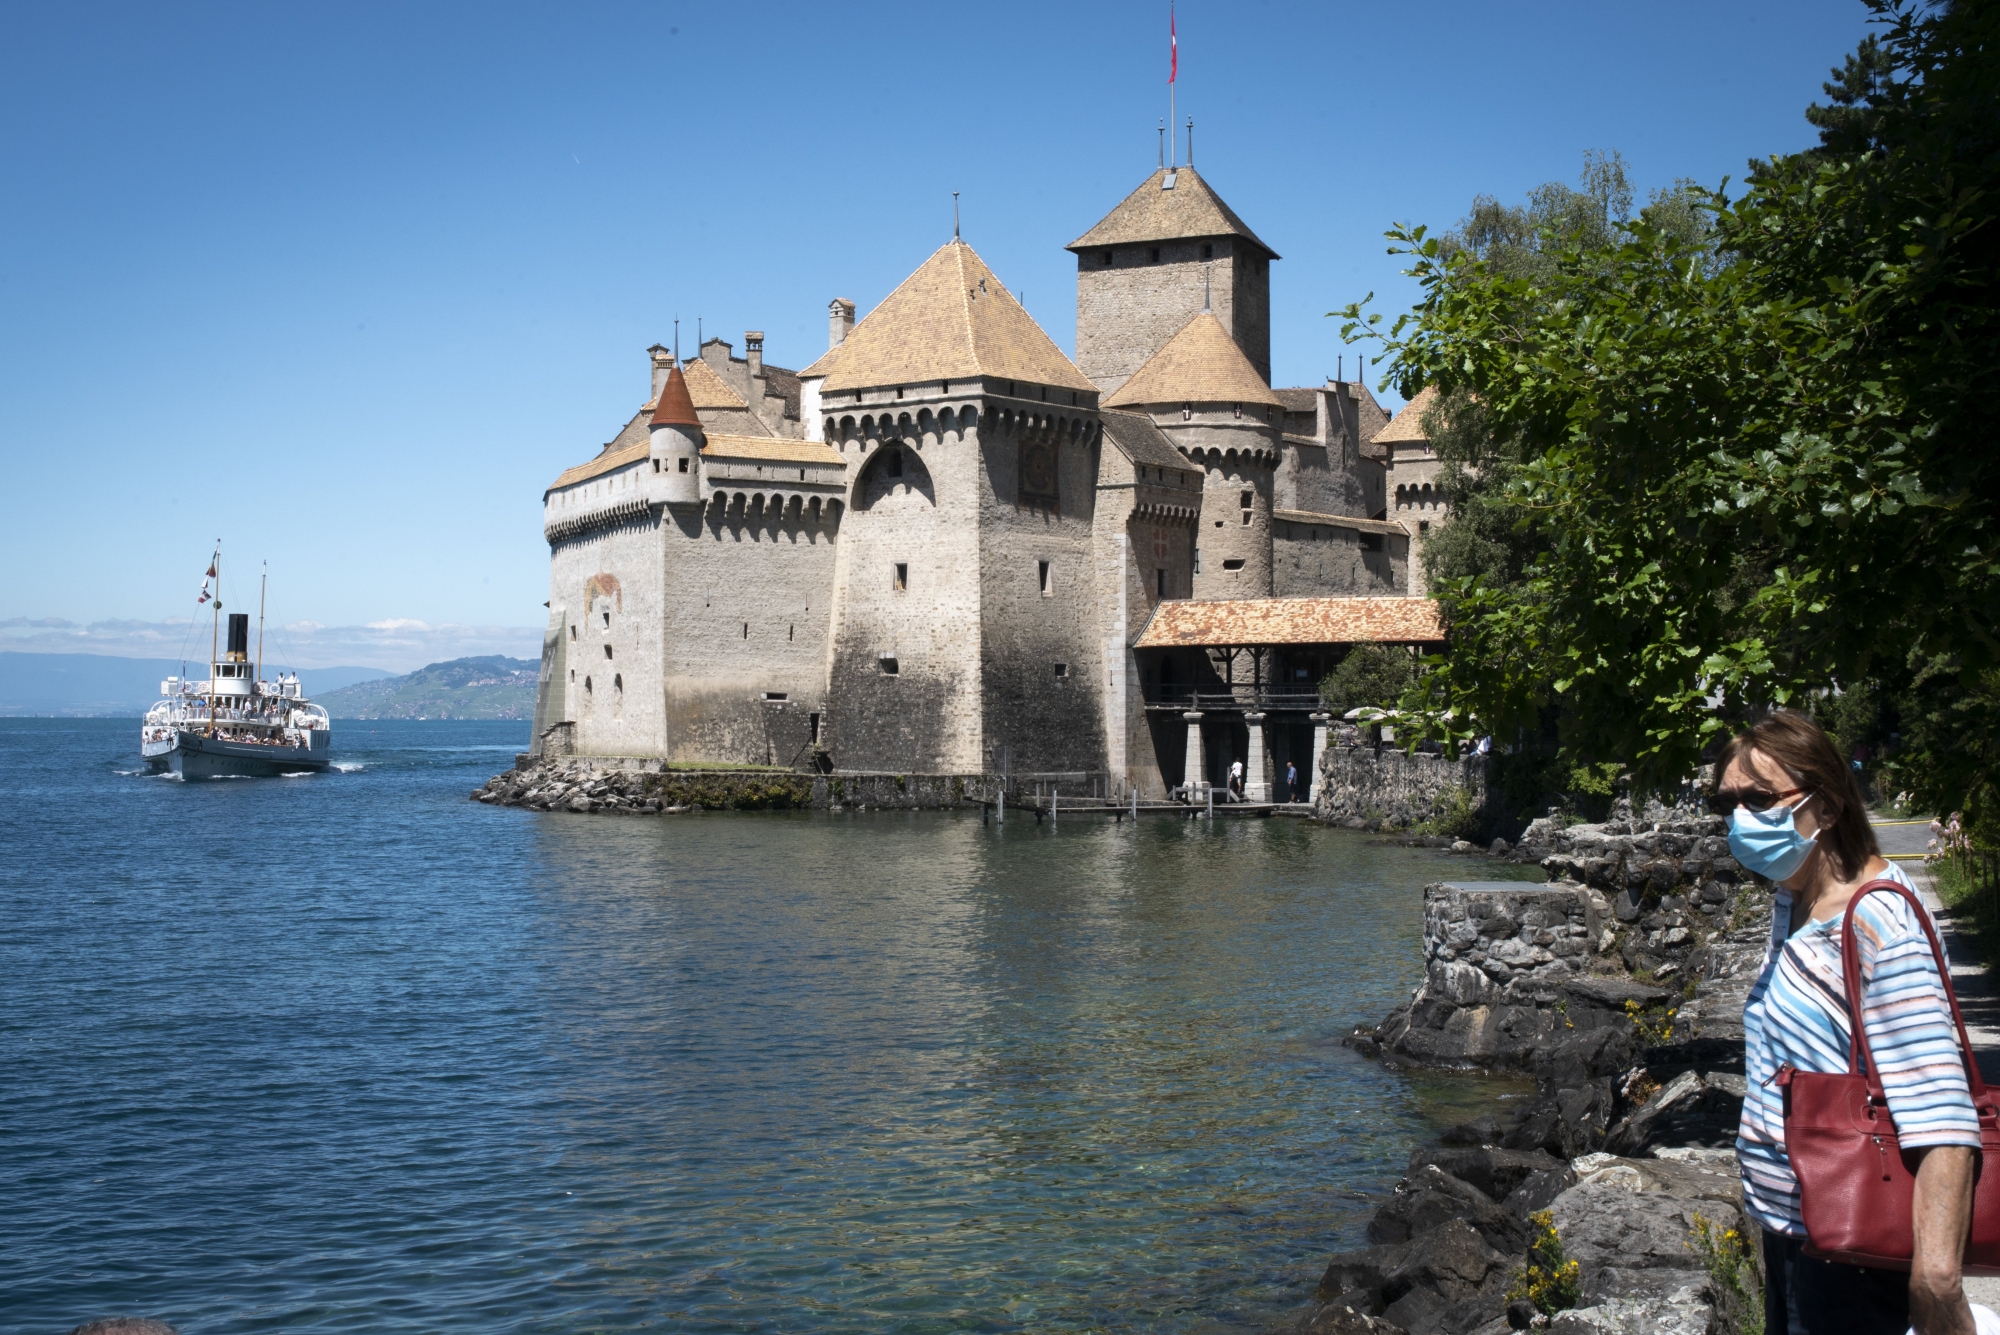 A tourist wearing protective face mask is pictured in front of the Chillon Castle (Chateau de Chillon) as the steamboat Vevey, CGN, sails on the Lake Geneva during the coronavirus disease (COVID-19) outbreak, in Veytaux near Montreux, Switzerland, Sunday, July 5, 2020. (KEYSTONE/Marcel Gillieron) ArcInfo